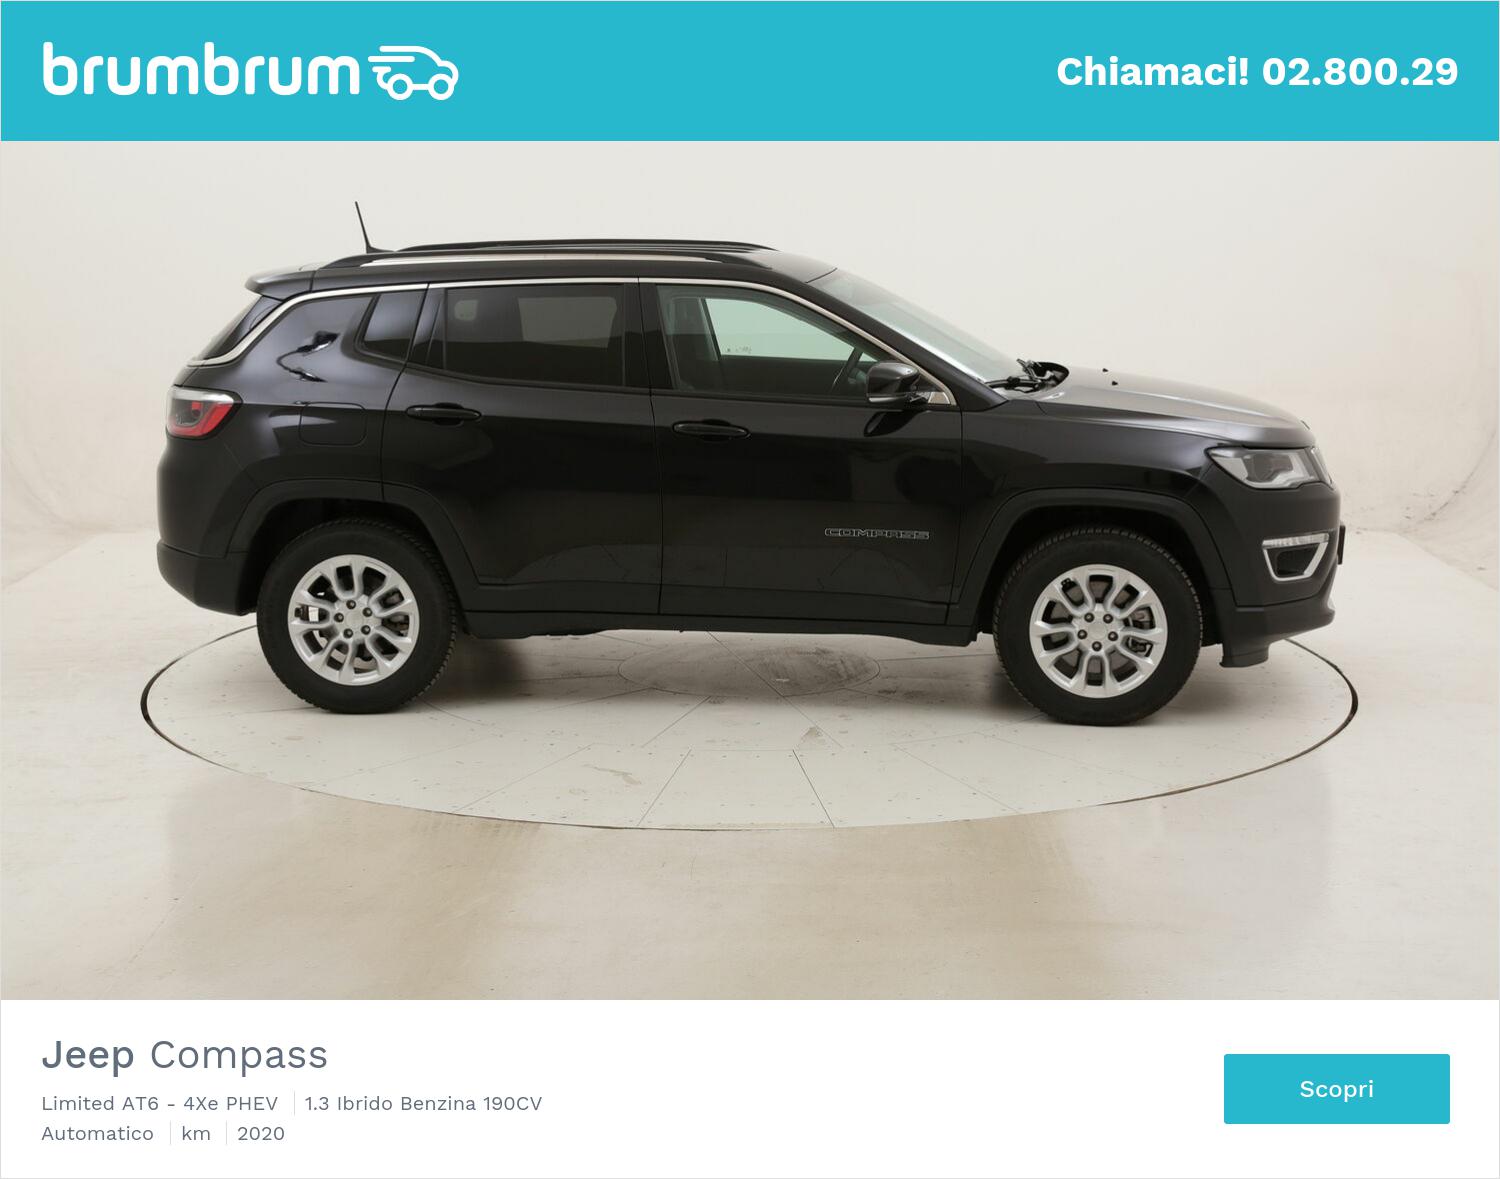 Jeep Compass Limited AT6 - 4Xe PHEV usata del 2020 con 7.487 km | brumbrum